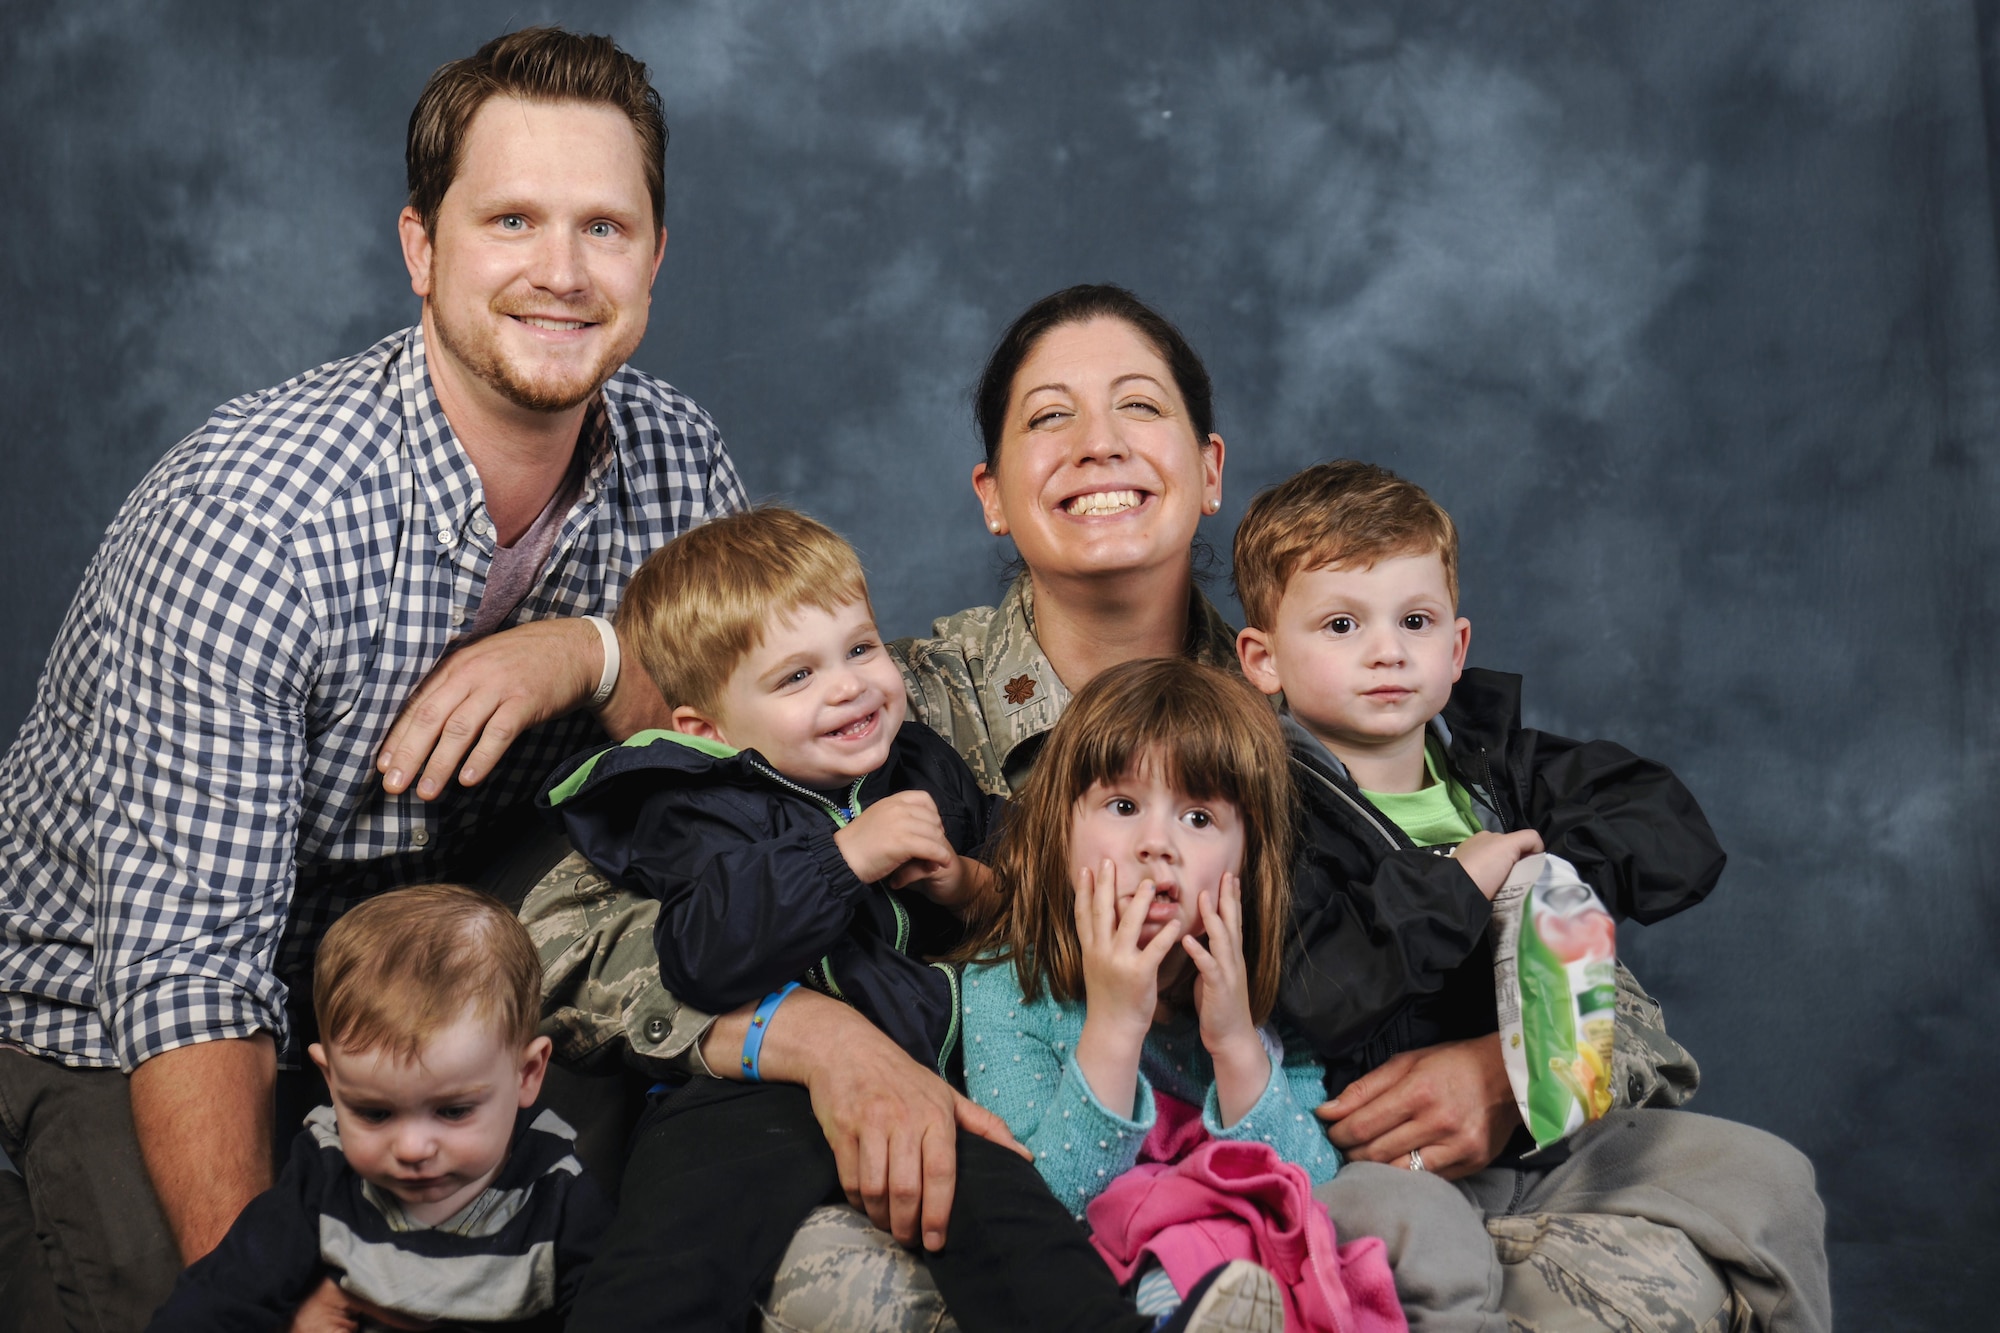 The Christi family poses for a photo at Joint Base Andrews, Md., April 27, 2017. Michael Christi, far right, son of Jeff Christi and Maj. Rebecca Christi, 799th Medical Group pediatrician, has autism spectrum disorder. The Air Force provides Michael with health and educational services, including Exceptional Family Member Program and Extended Care Health Options, which in turn provide therapies such as applied behavior analogy, speech therapy, and occupational therapy. April is also Autism Awareness Month, which is meant to increase understanding and acceptance of autism. (U.S. Air Force photo by Airman 1st Class Valentina Lopez)